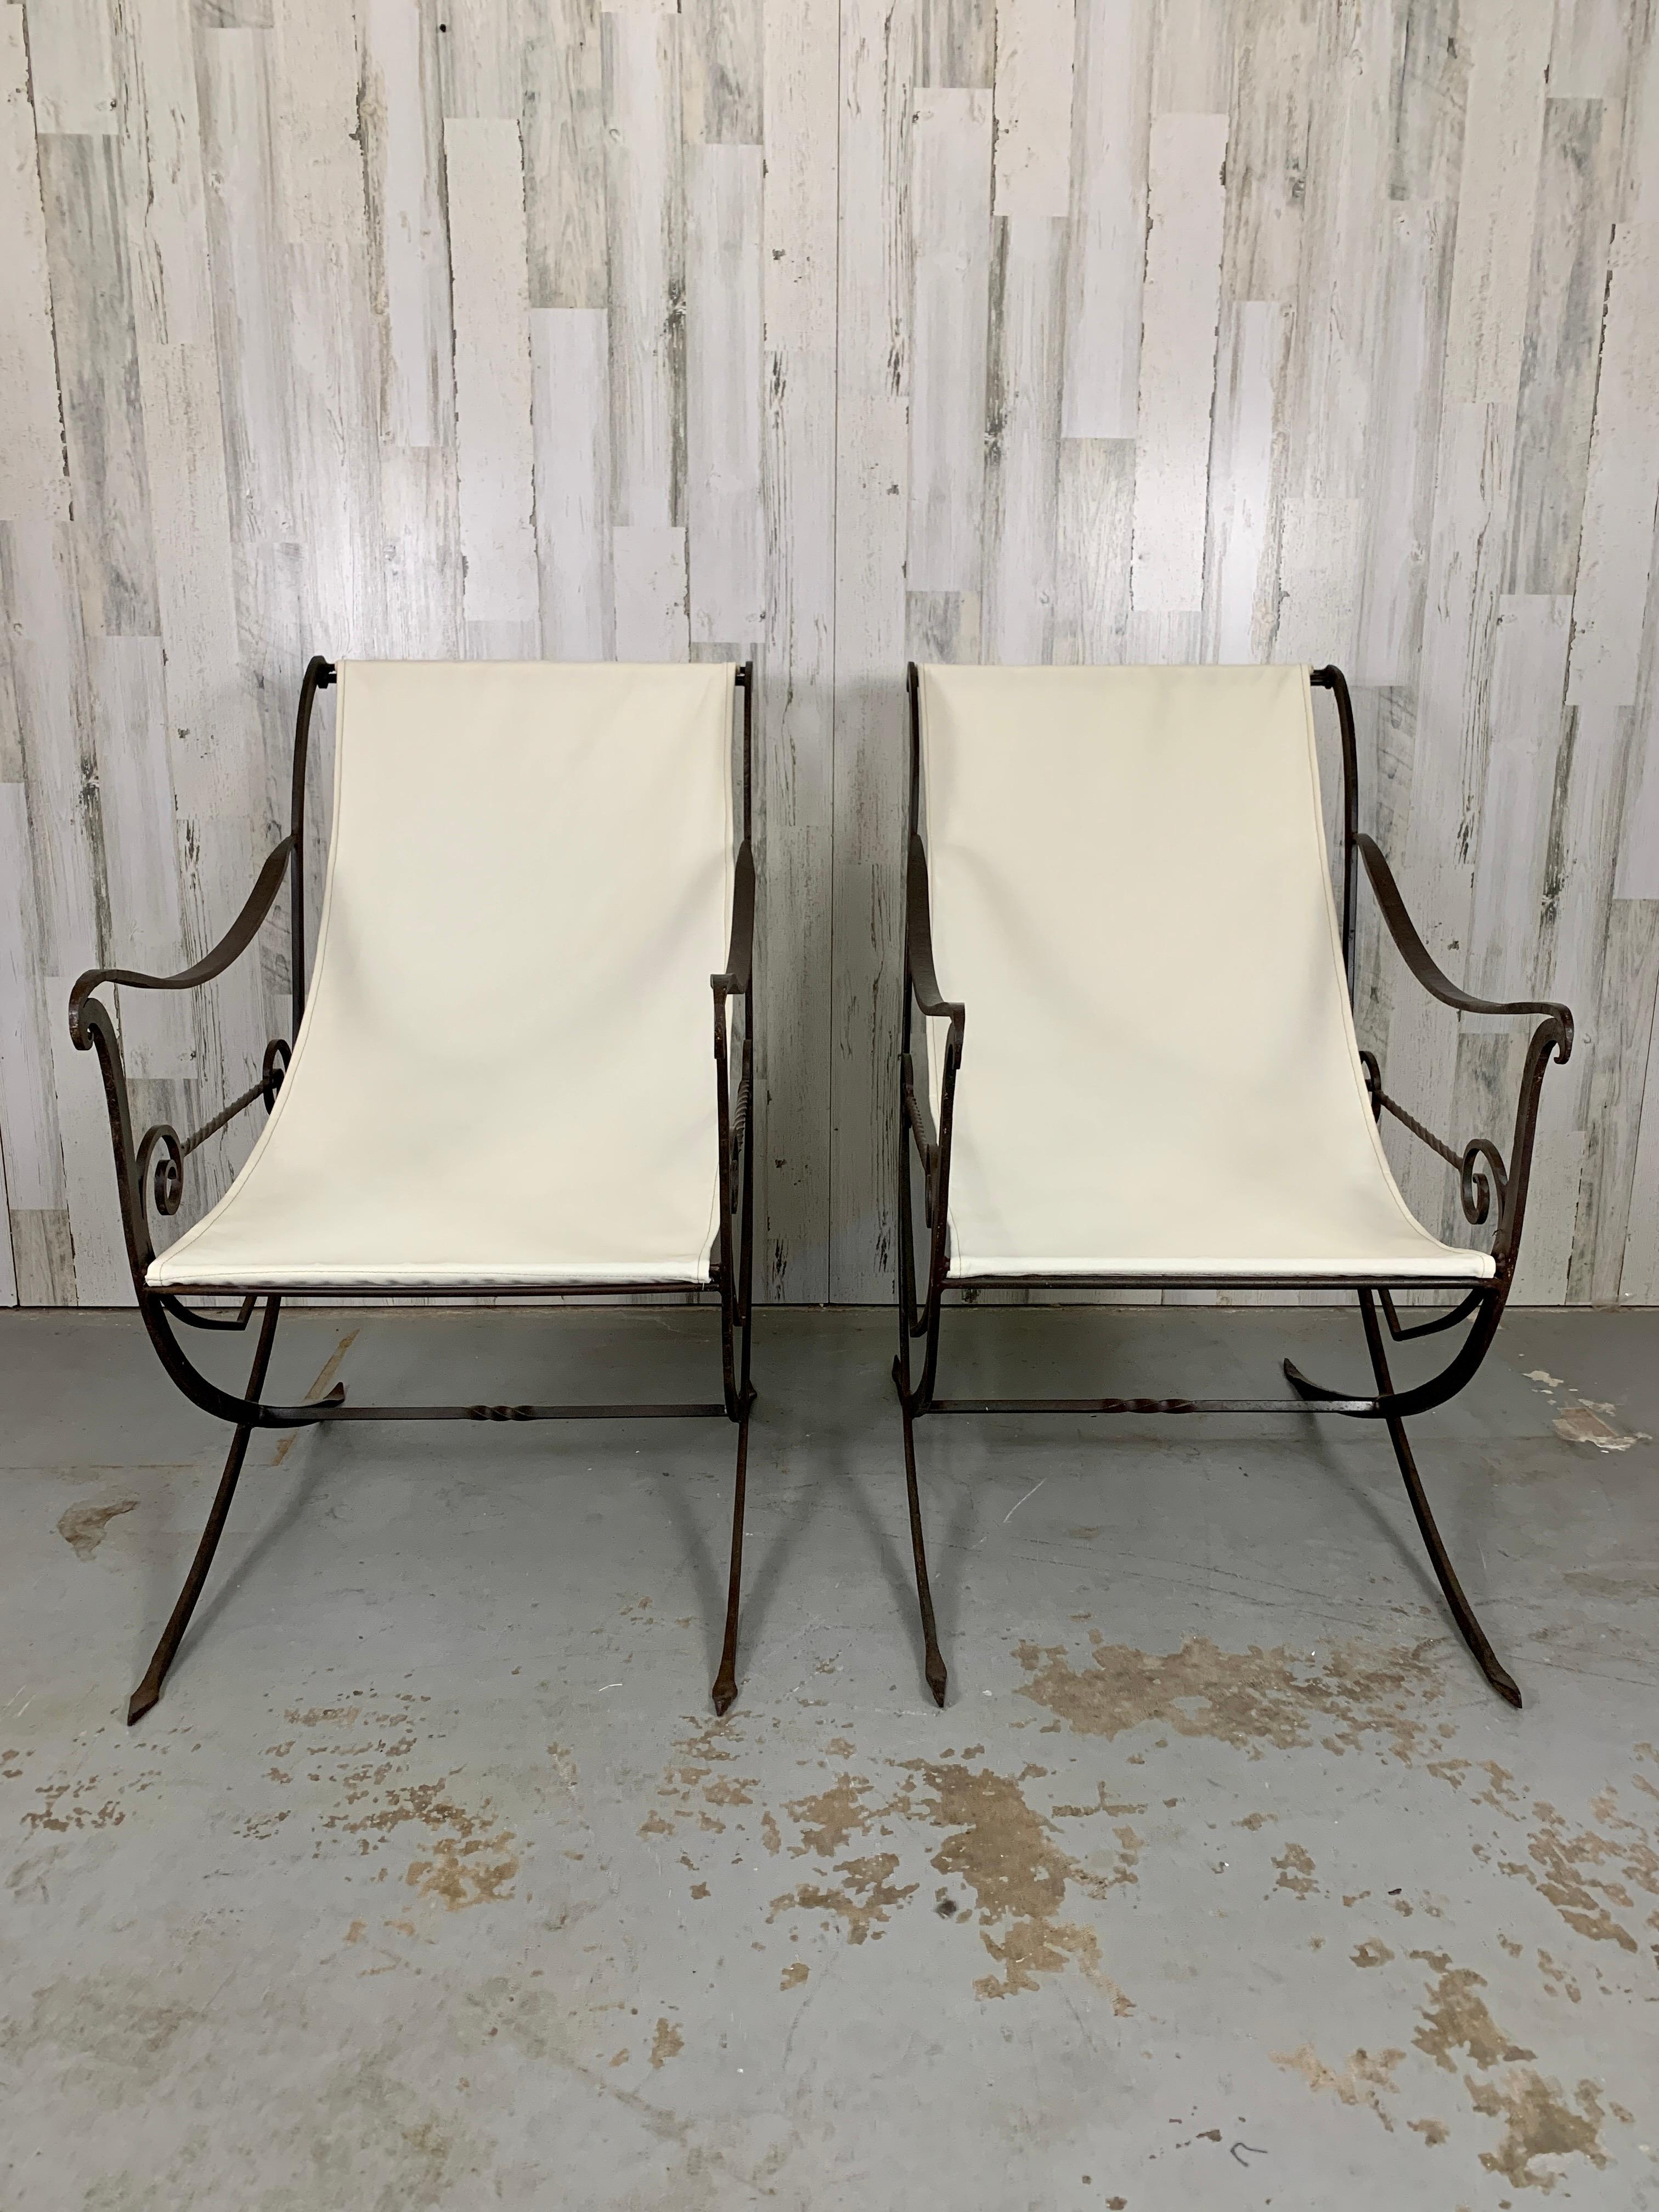 French Sculpted Forged Iron Sling Chairs, 1940's For Sale